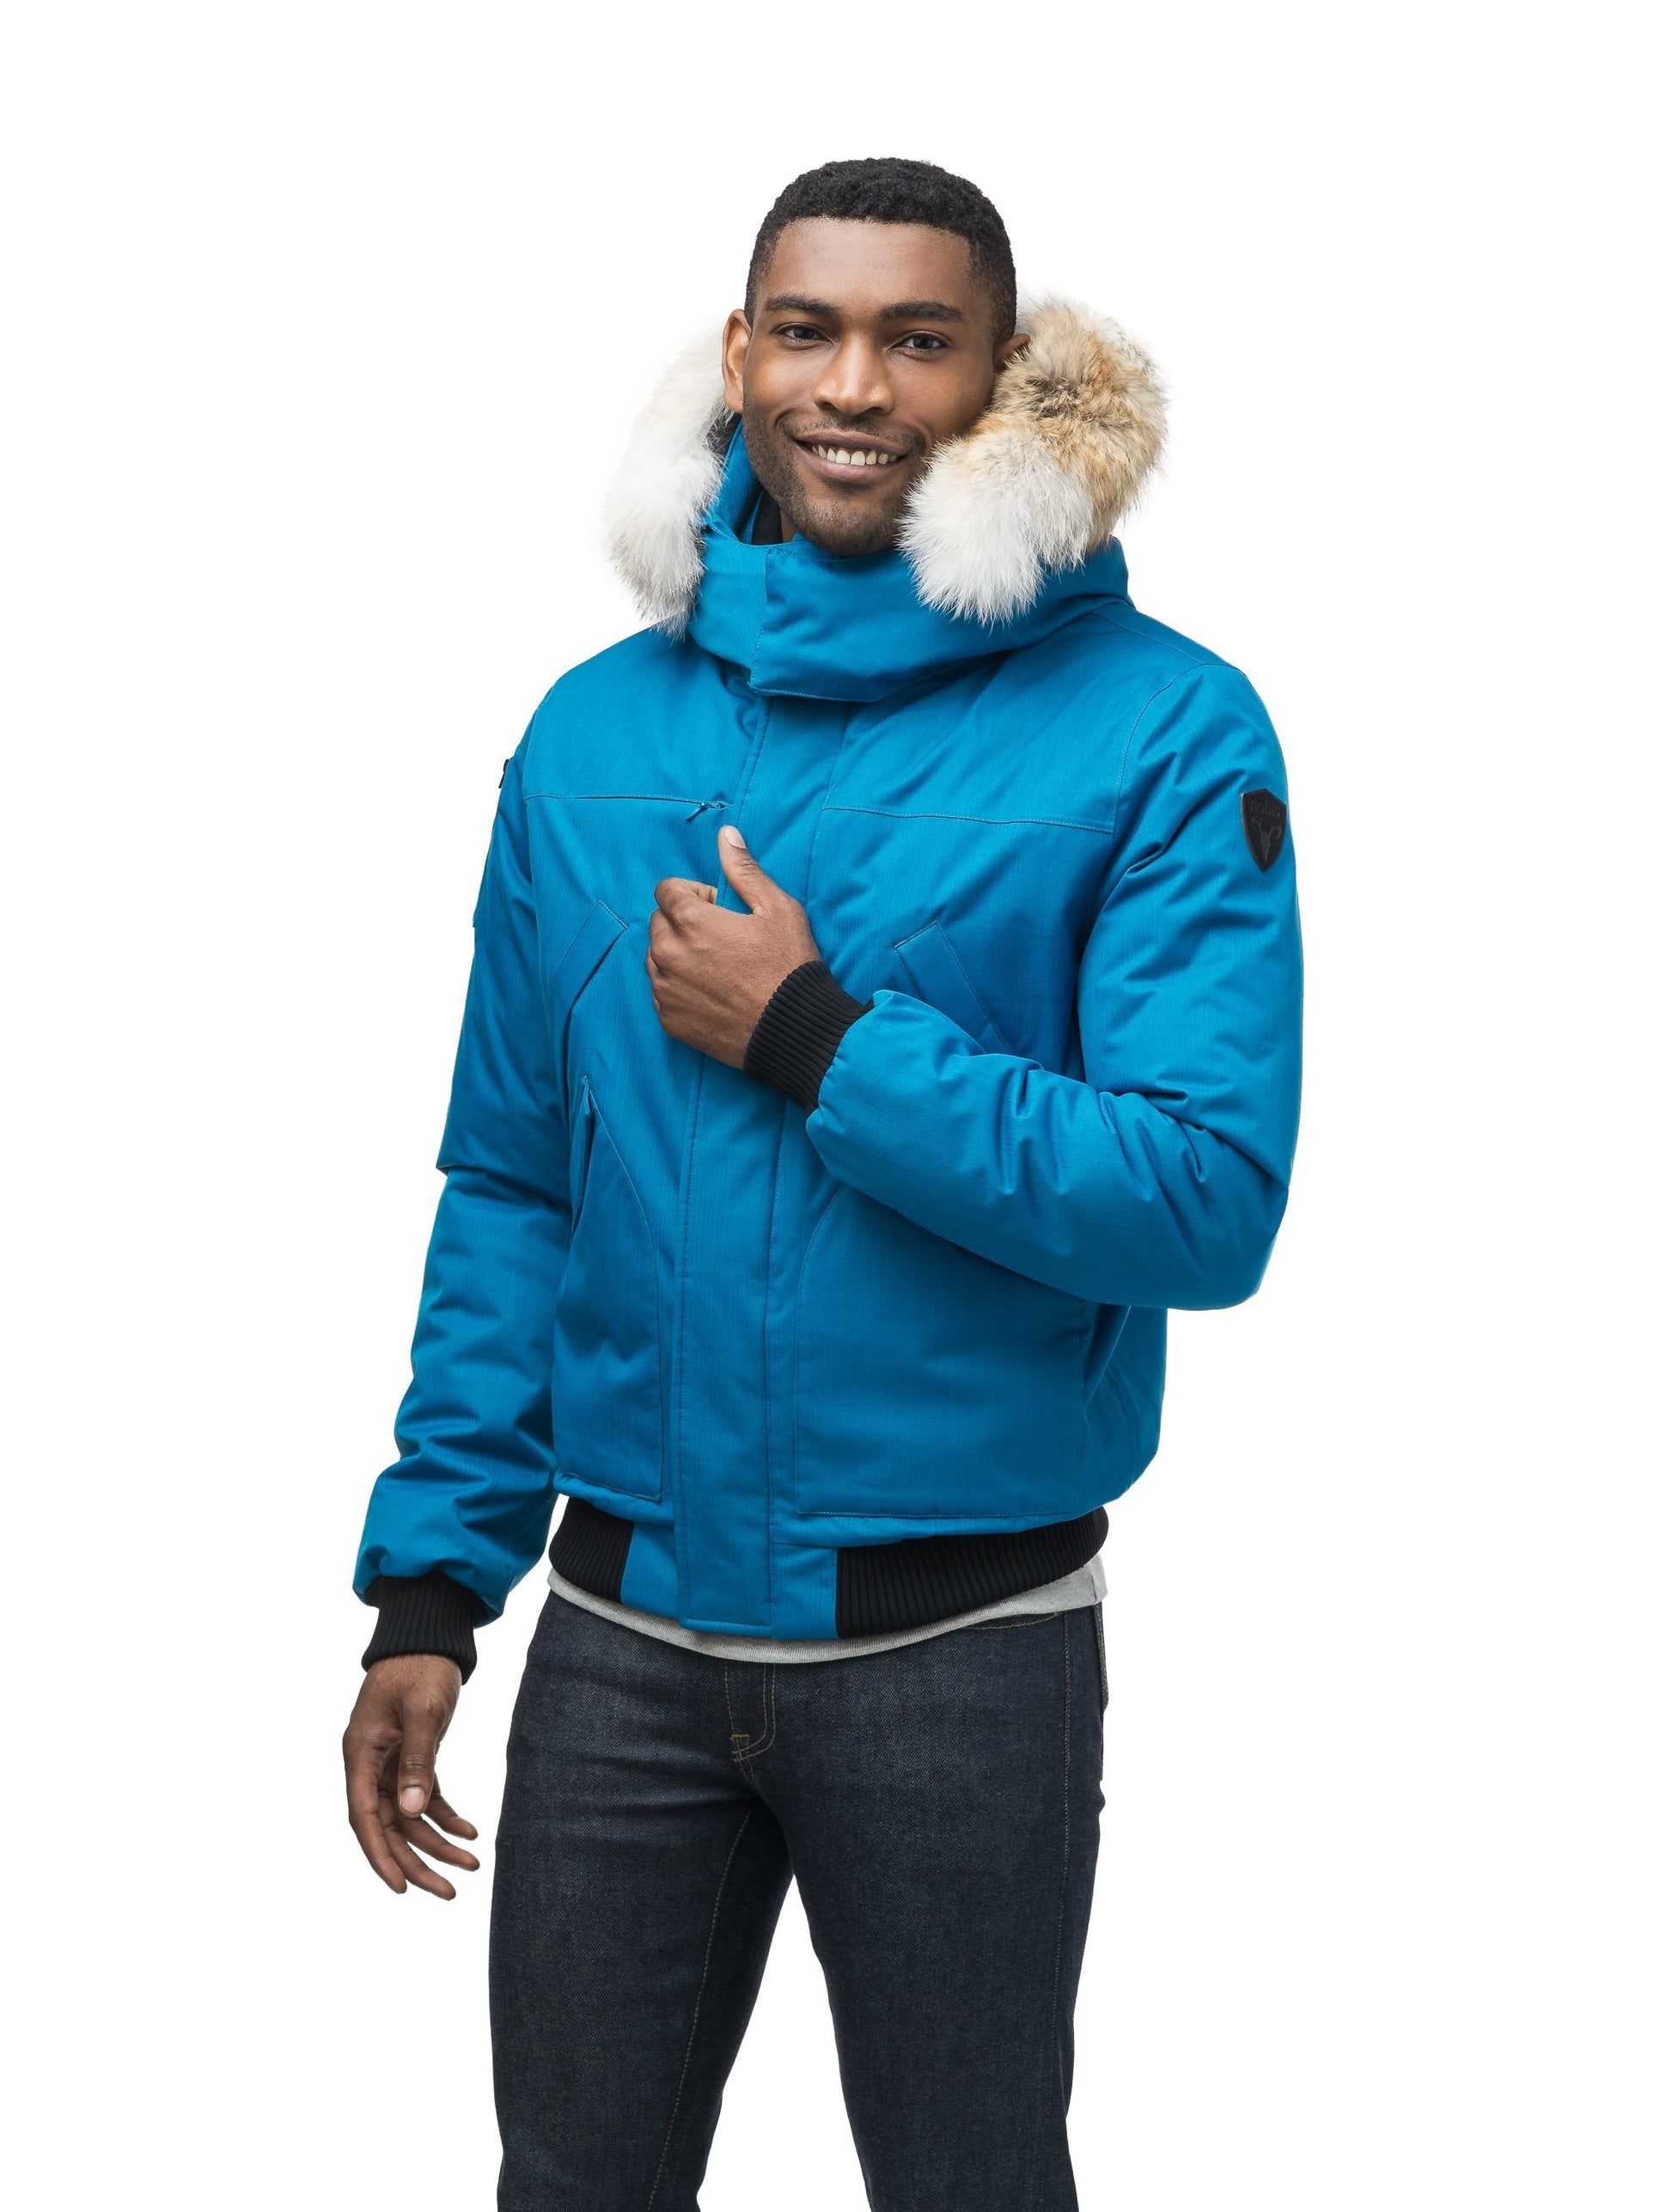 Men's classic down filled bomber jacket with a down filledÃƒÆ’Ã¢â‚¬Å¡Ãƒâ€šÃ‚Â hood that features a removable coyote fur trim and concealed moldable framing wire in Sea Blue